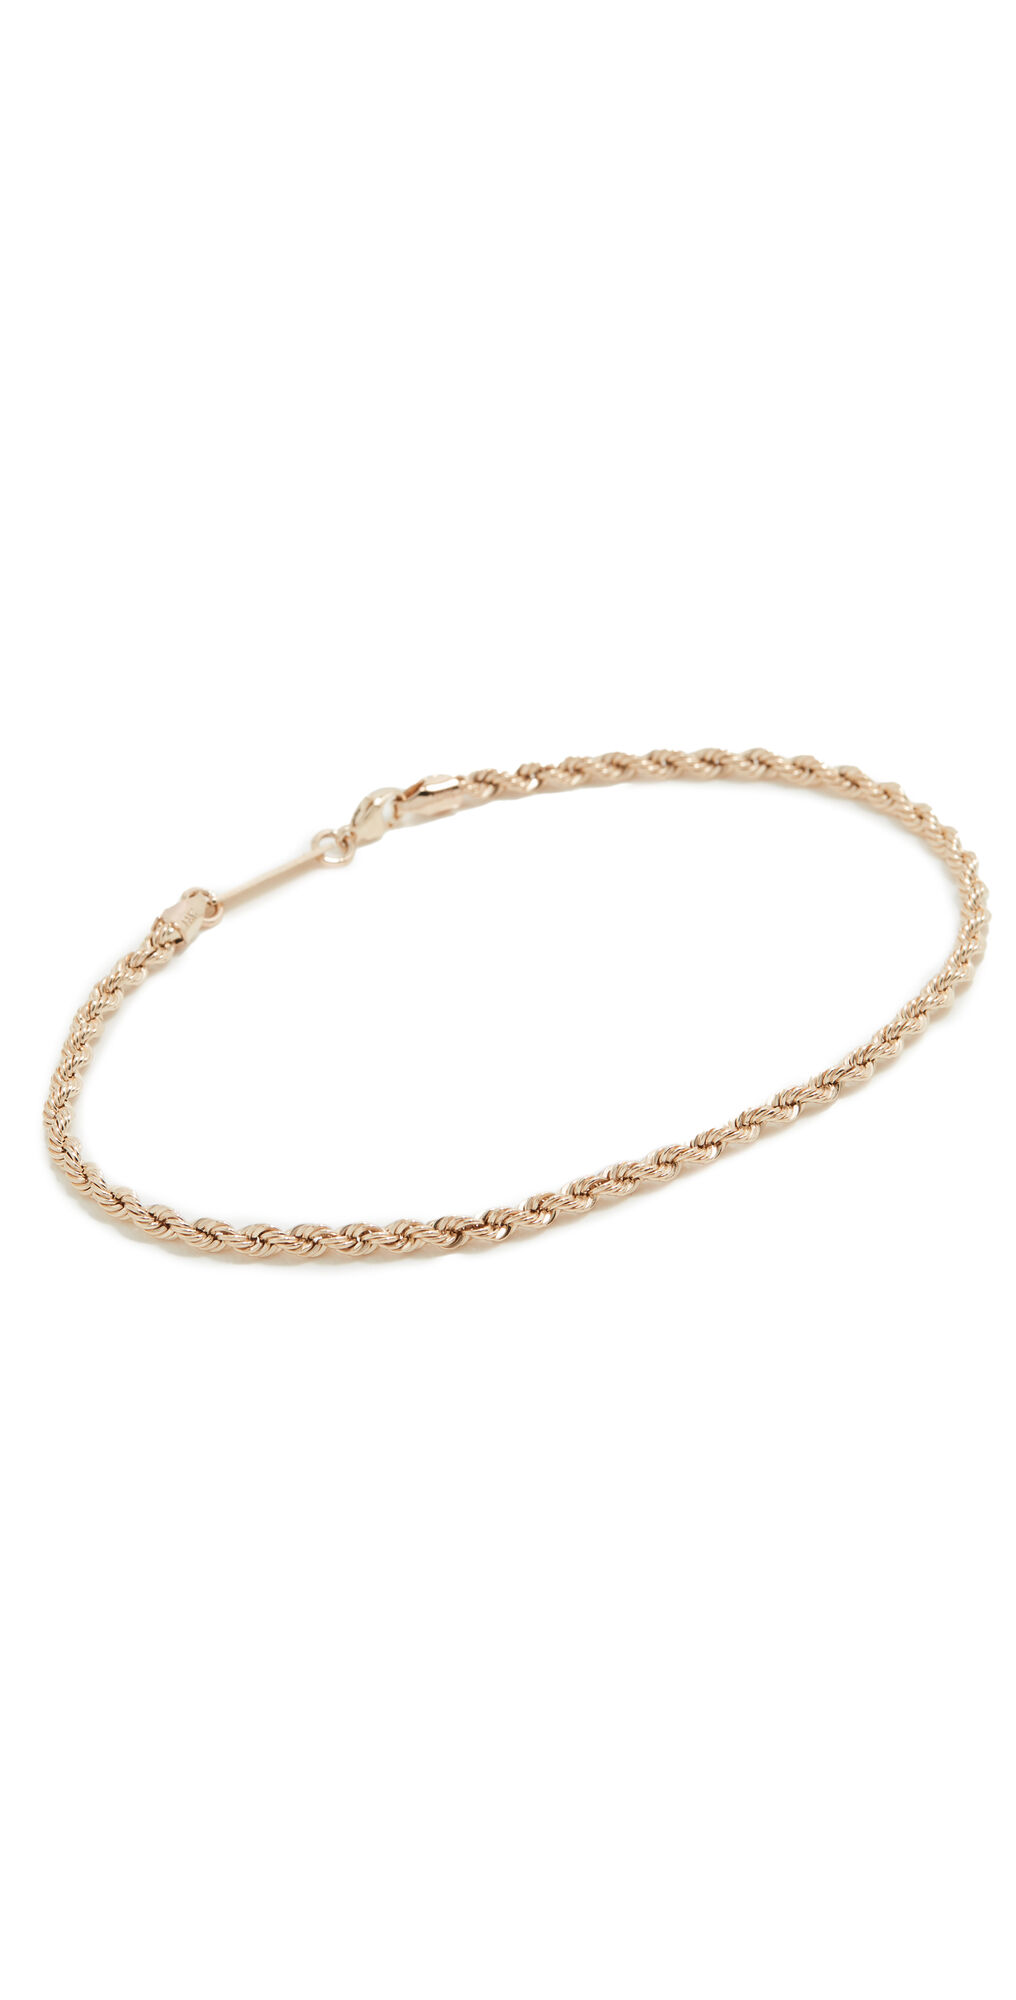 Chicco Zoe Chicco Heavy Metal Anklet Gold One Size  Gold  size:One Size